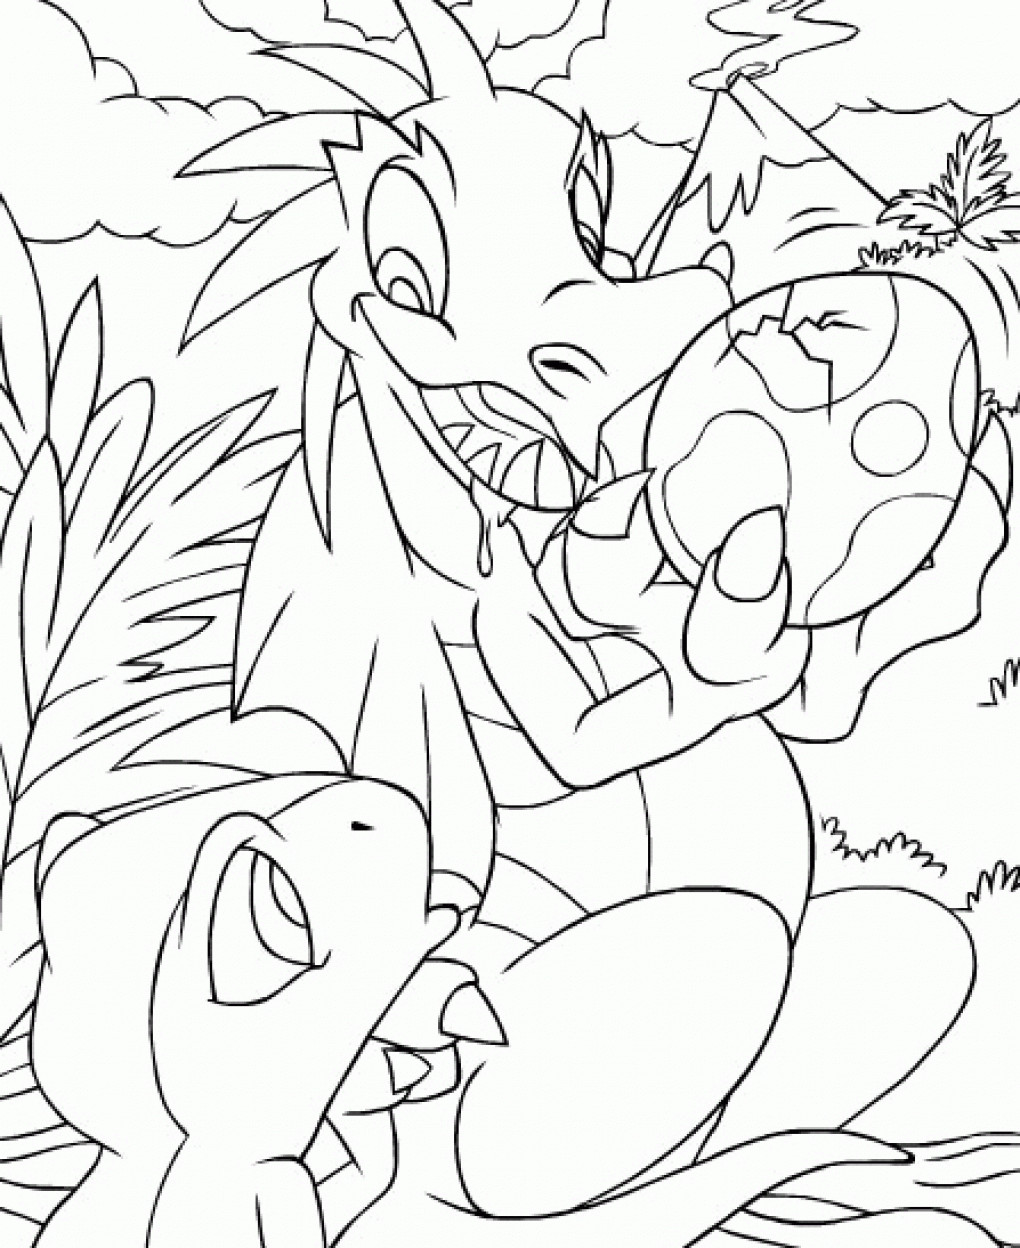 Free Printable Coloring Pages For Toddlers
 Free Printable Neopets Coloring Pages For kids